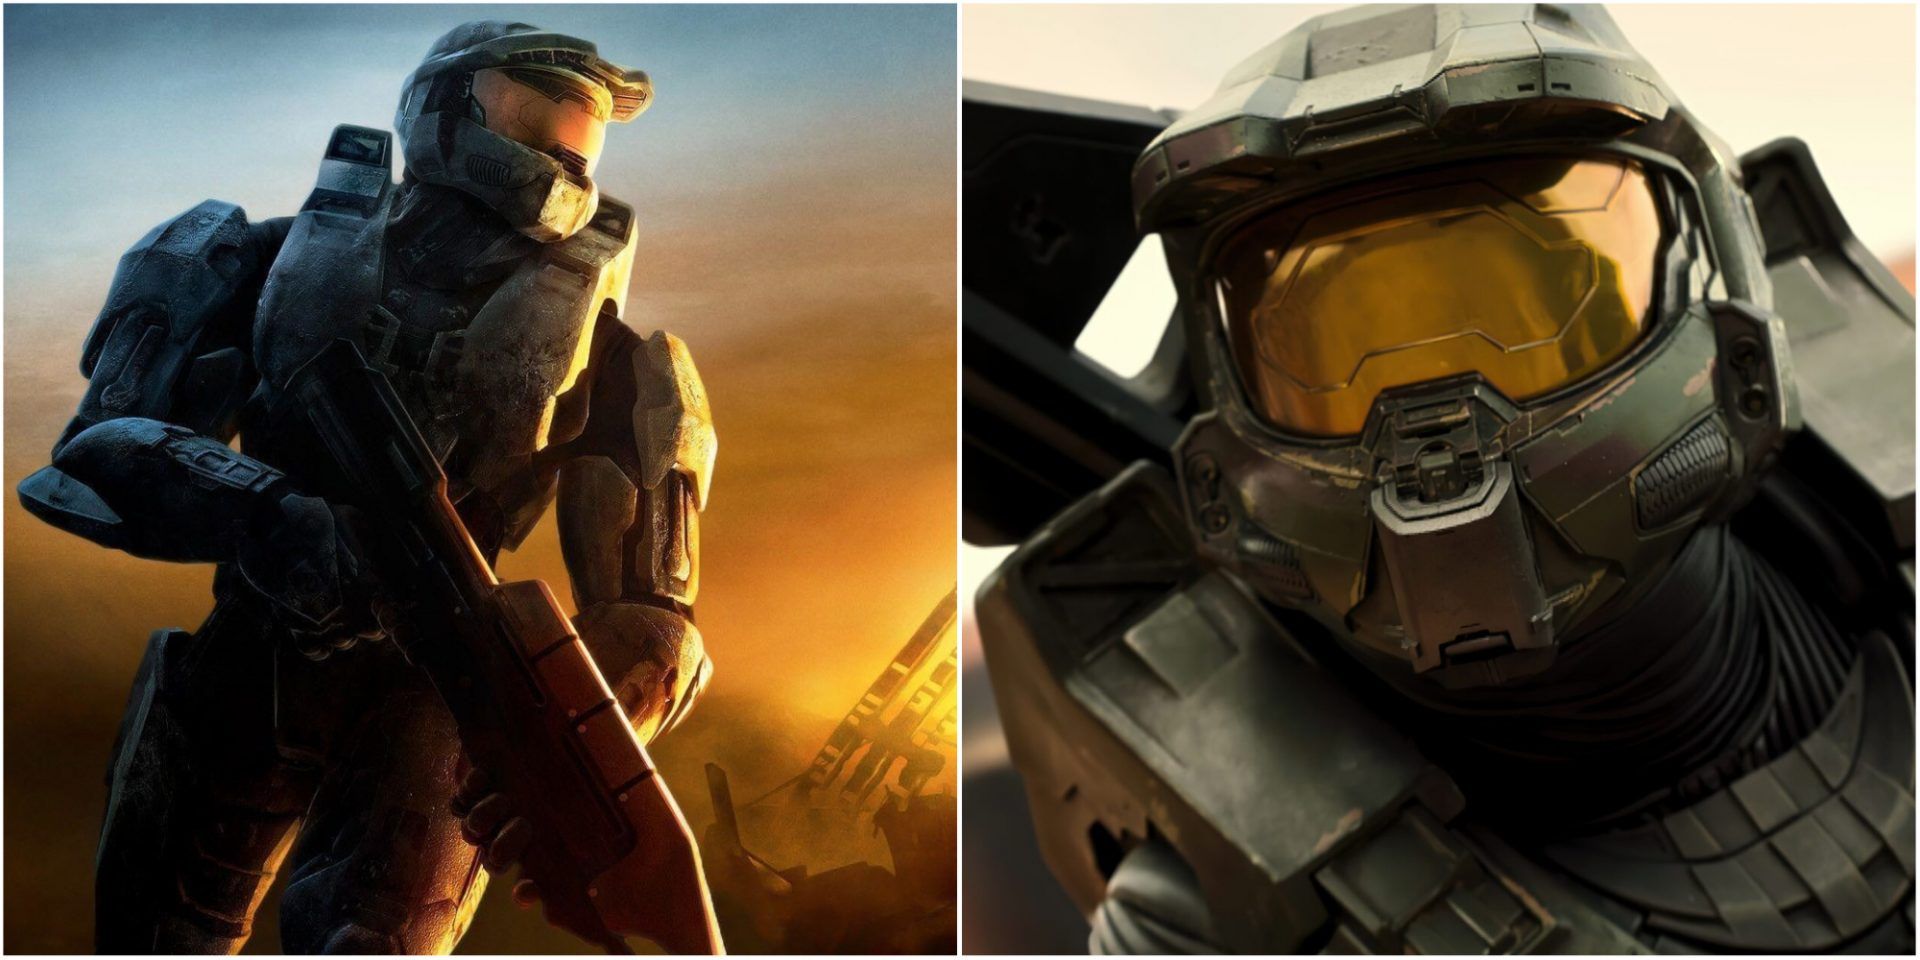 Hale 3 Cover Art Master Chief With Assualt Rifle And Halo TV Series Trailer Still Master Chief